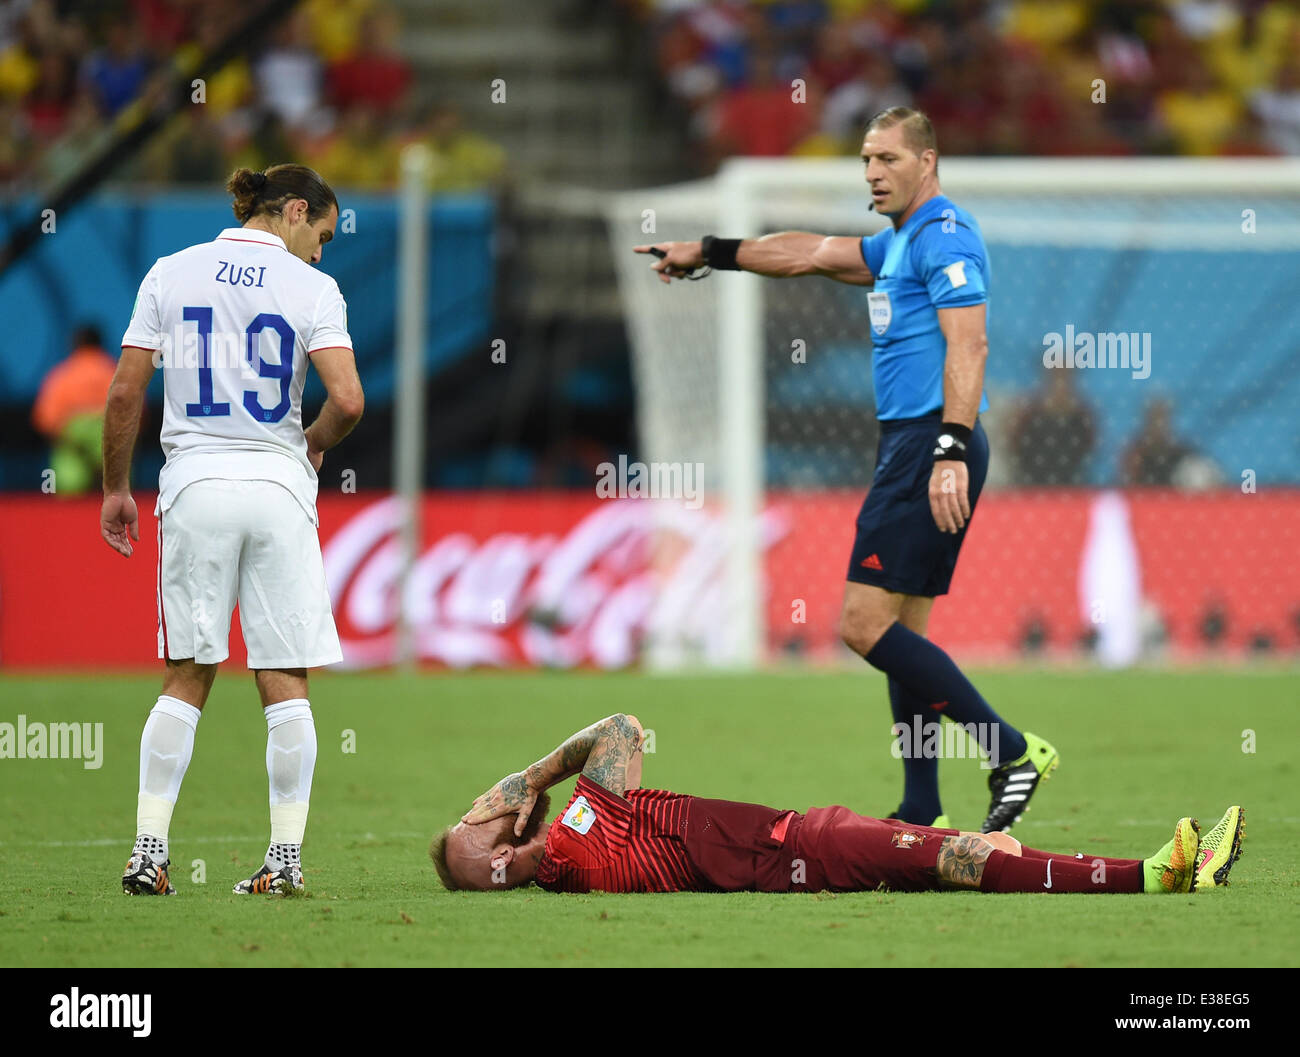 Manaus, Brazil. 22nd June, 2014. Raul Meireles of Portugal lies on the pitch next to Graham Zusi (L) of USA and referee Nestor Pitana (R) of Argentina after picking up an injury during the FIFA World Cup 2014 group G preliminary round match between the USA and Portugal at the Arena Amazonia Stadium in Manaus, Brazil, 22 June 2014. Photo: Marius Becker/dpa/Alamy Live News Stock Photo